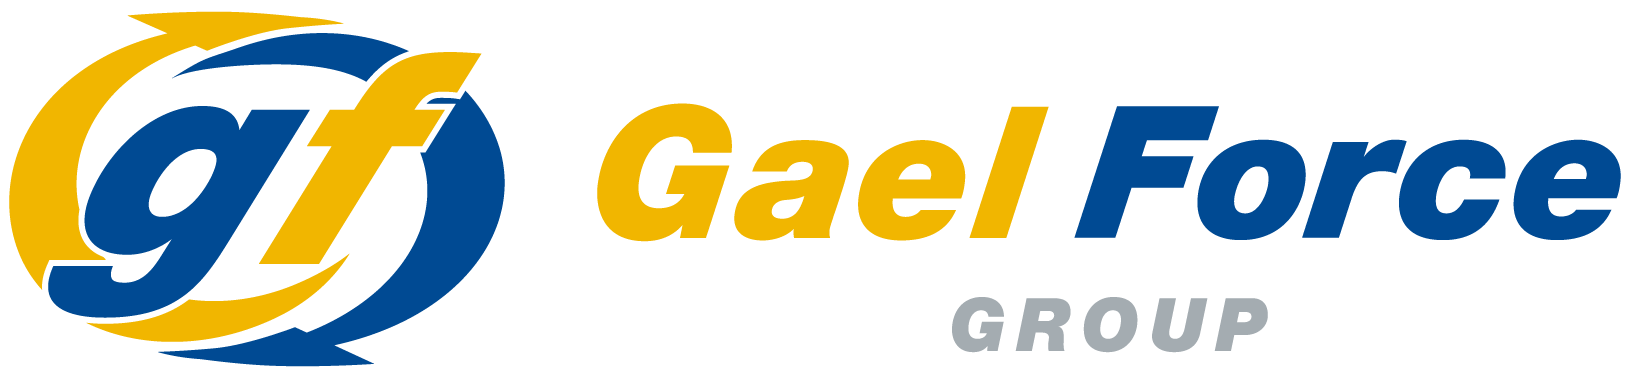 The GaelForce logo for wide devices